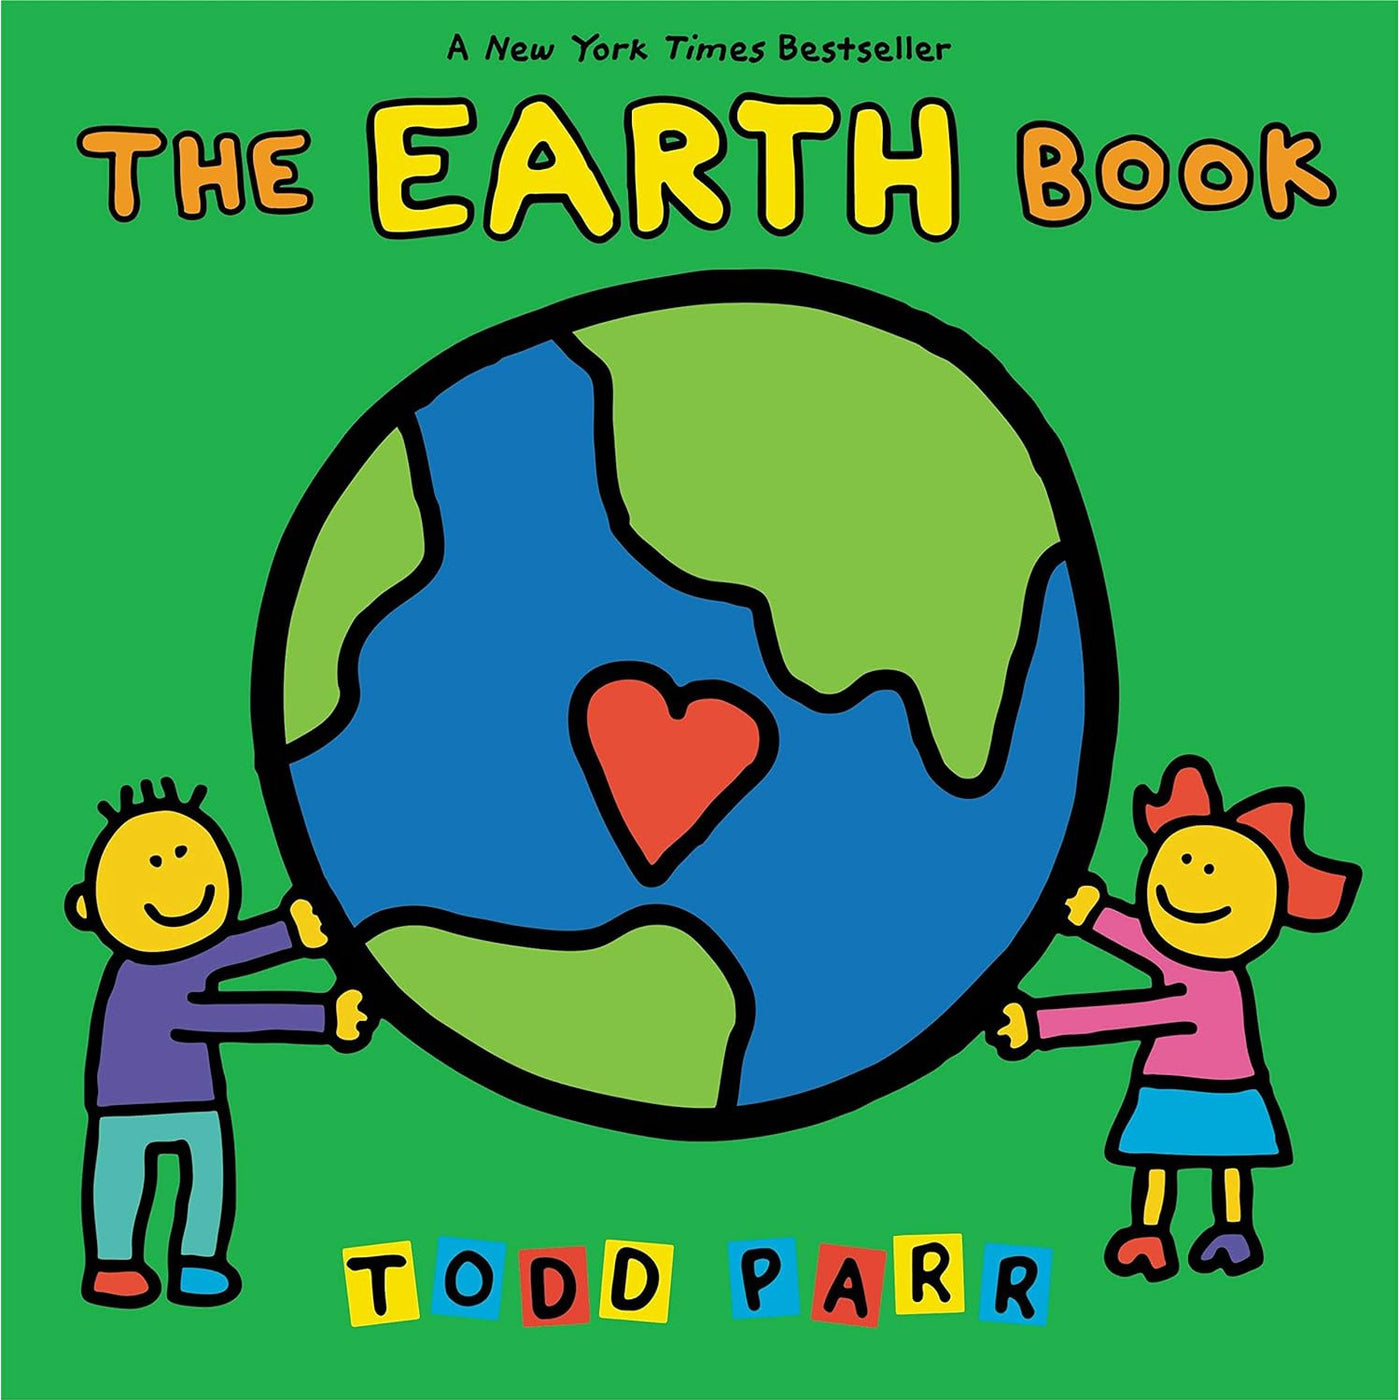 Todd Parr: The Earth Book